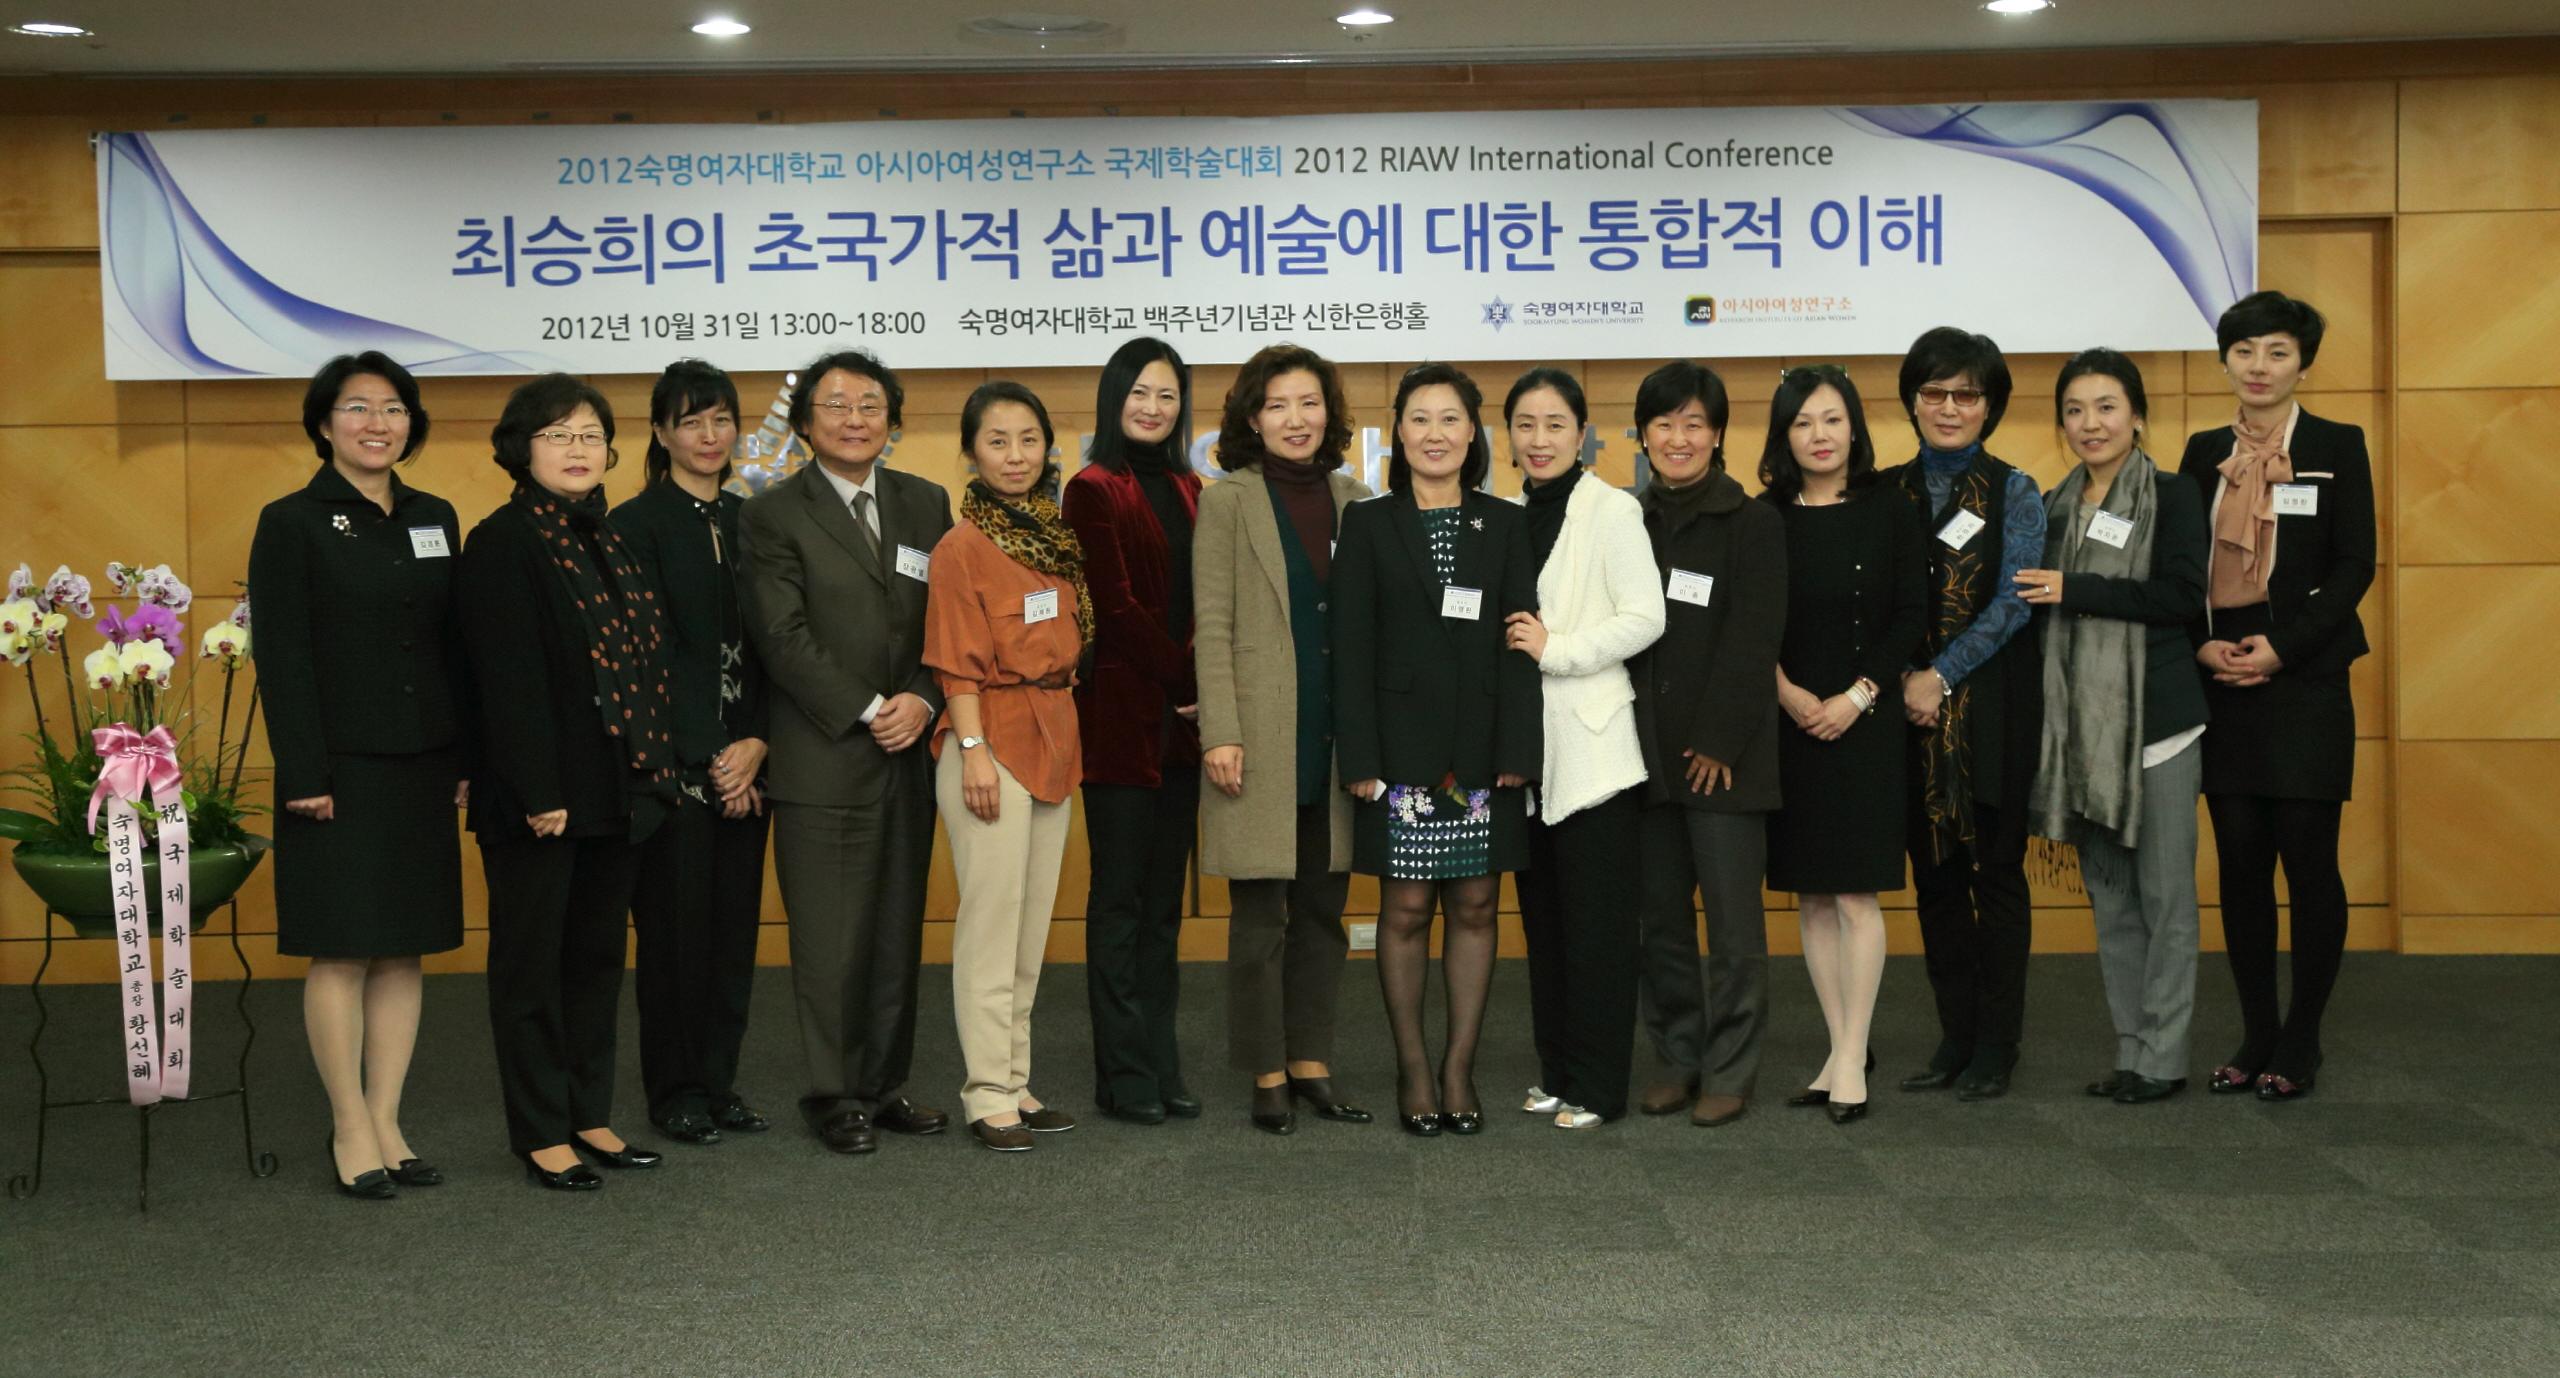 'Sheds new light on Choi Seung Hee,' The Research Institute of Asian Women held a symposium